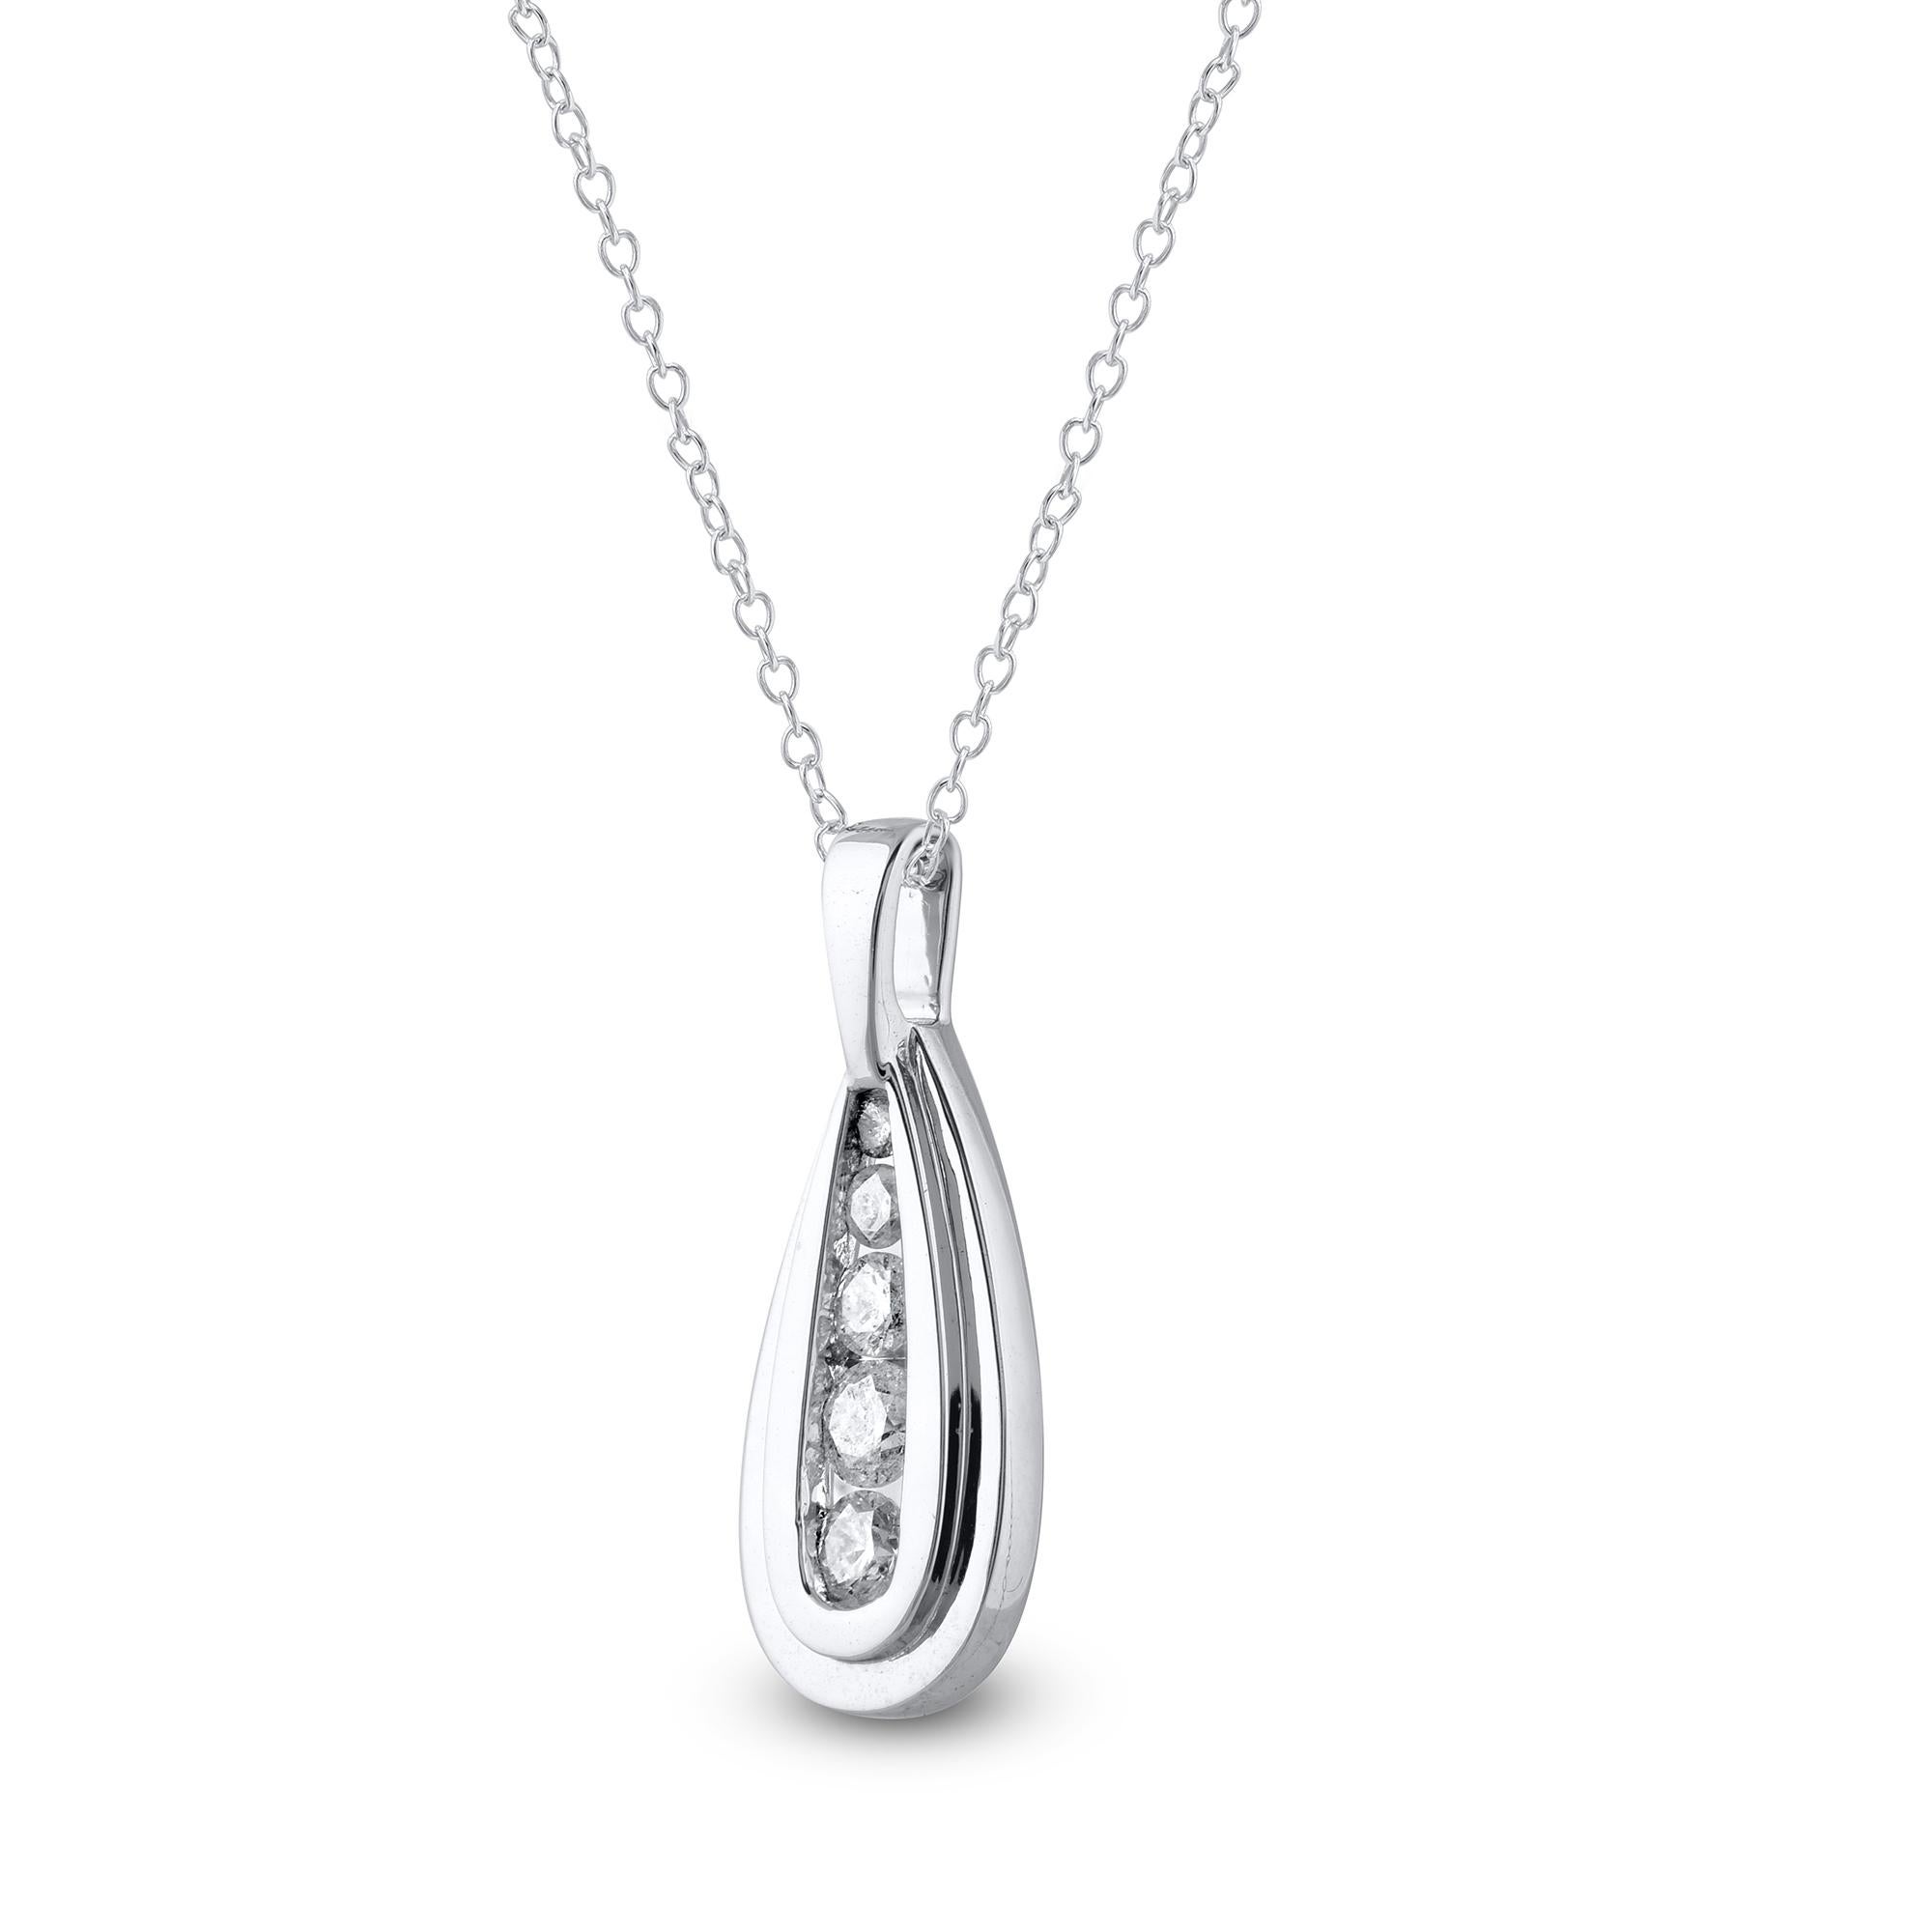 Bring sparkle and sophisticated style to any look when you wear this pear-shaped pendant. Designed in 14 karat white gold, studded with 5 brilliant-cut diamonds in channel setting. it will come along with an 18 inch chain. The diamonds are graded